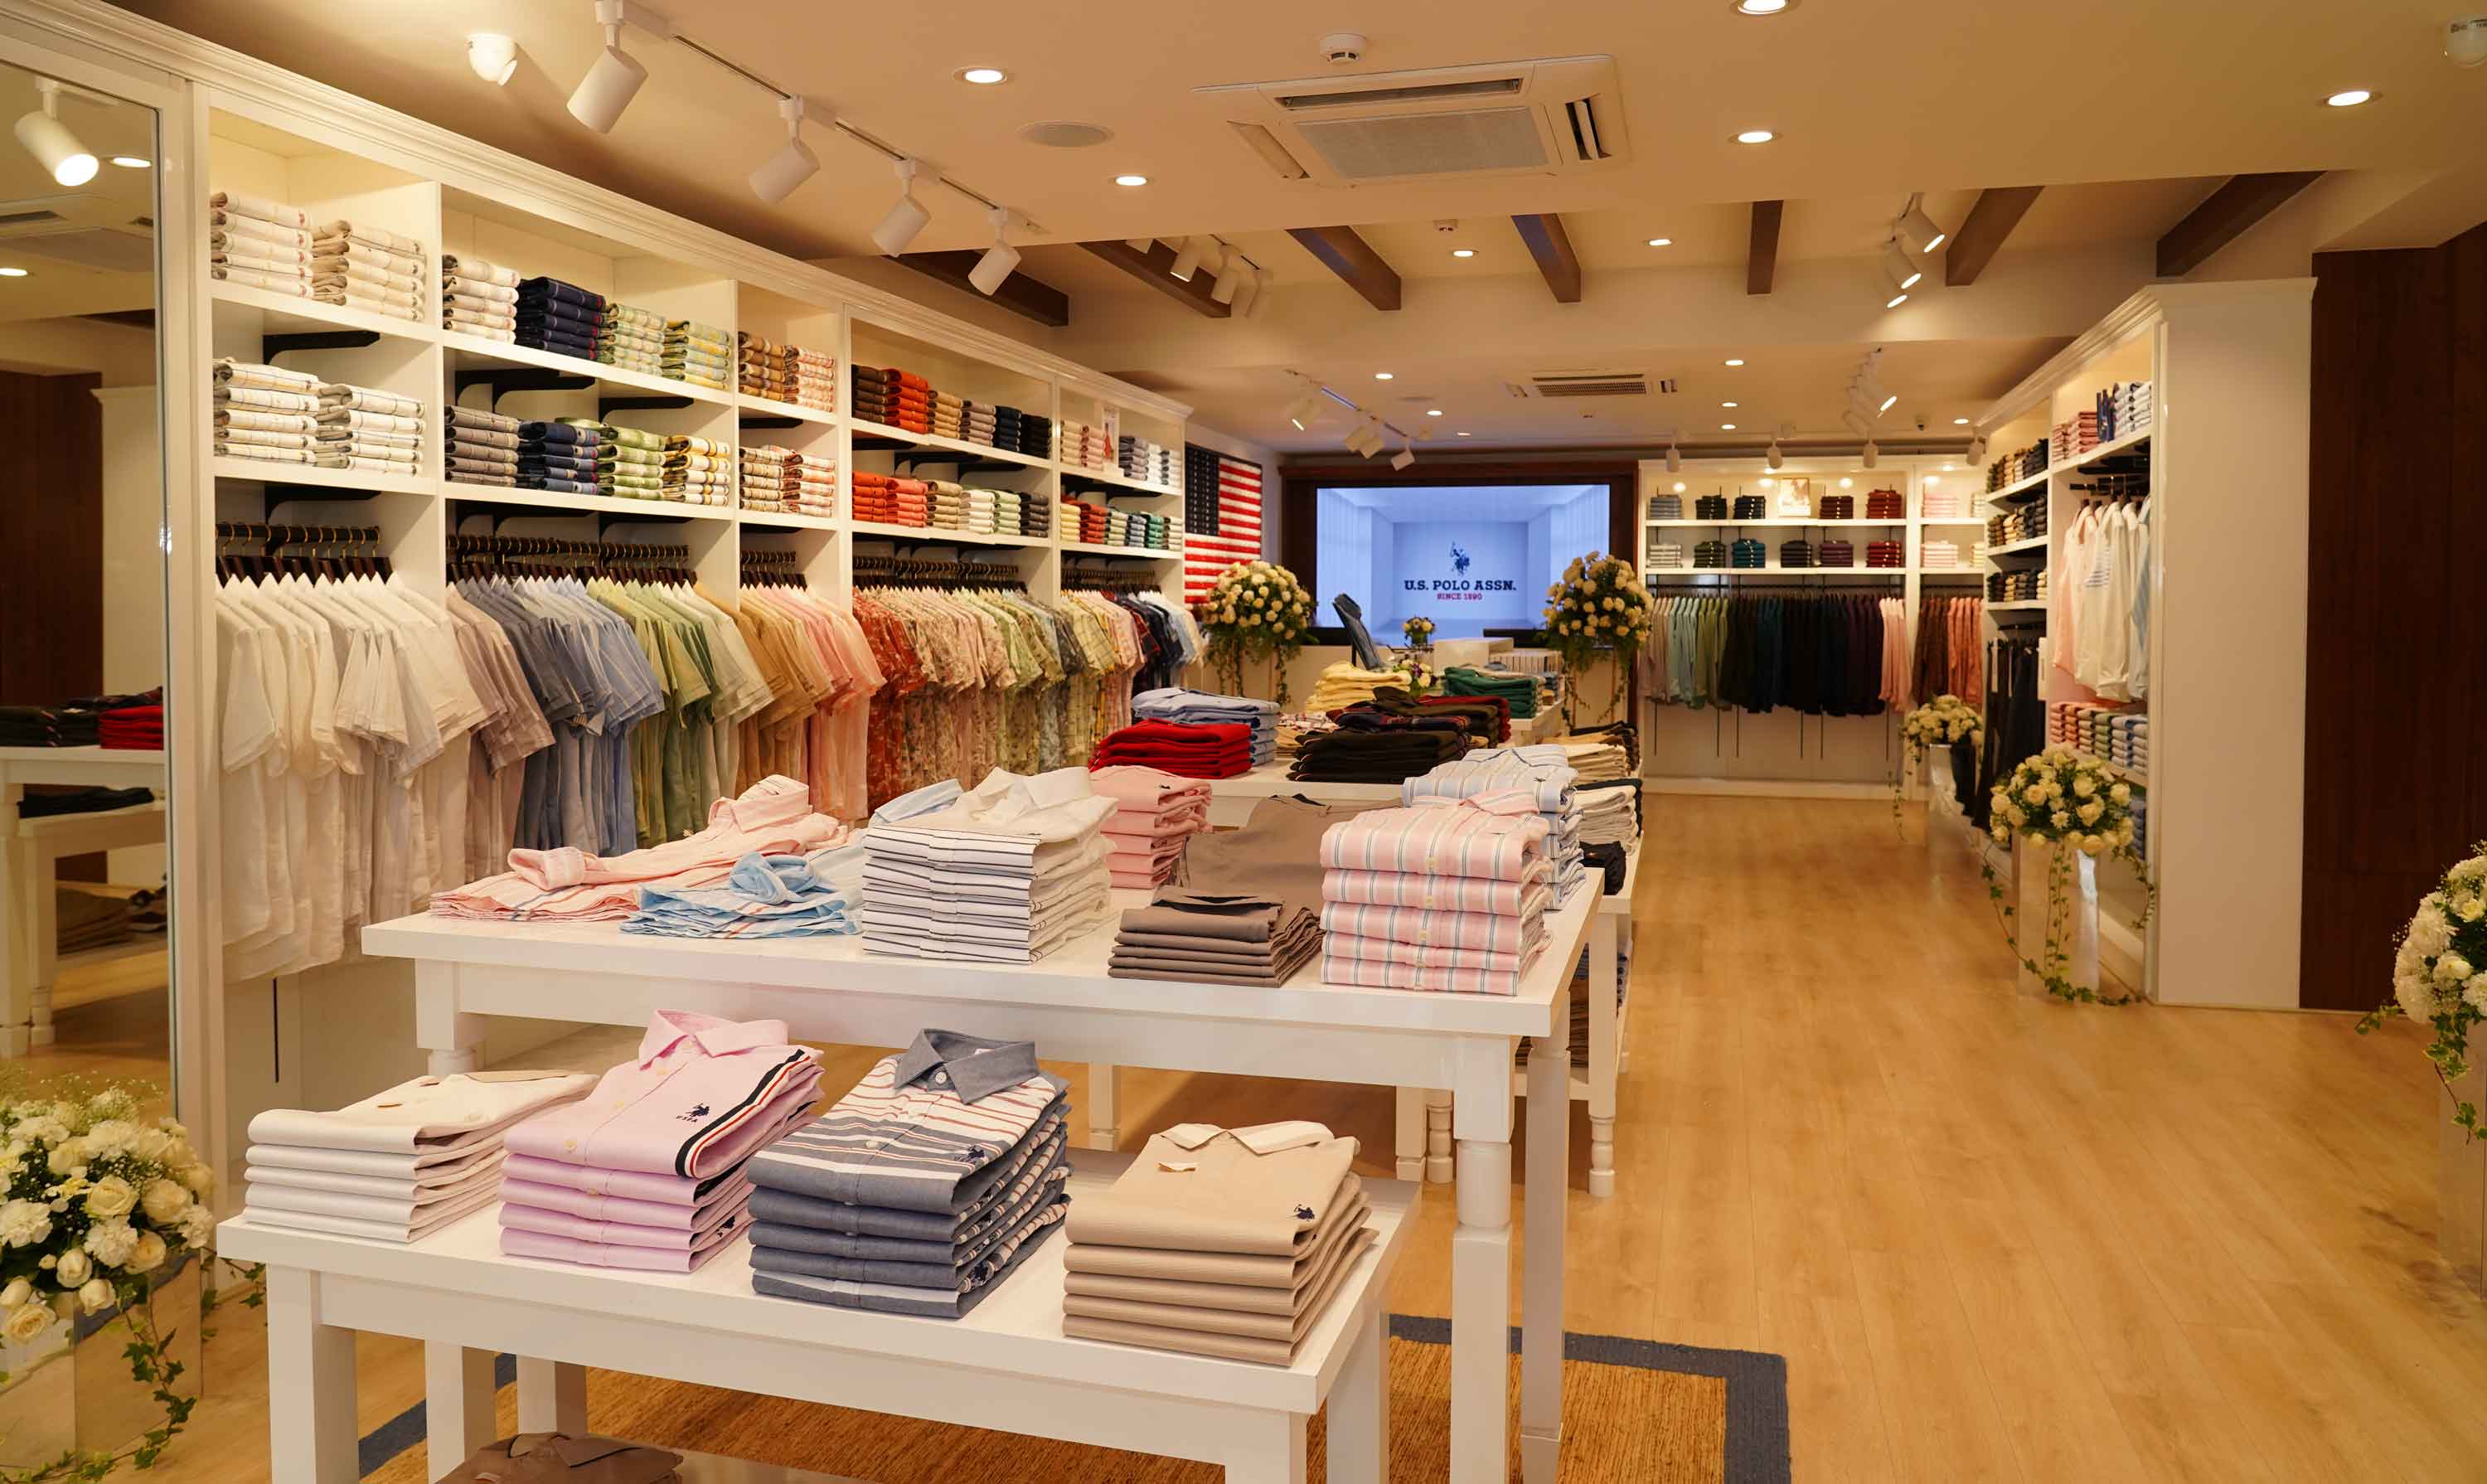 Polo store inside look 